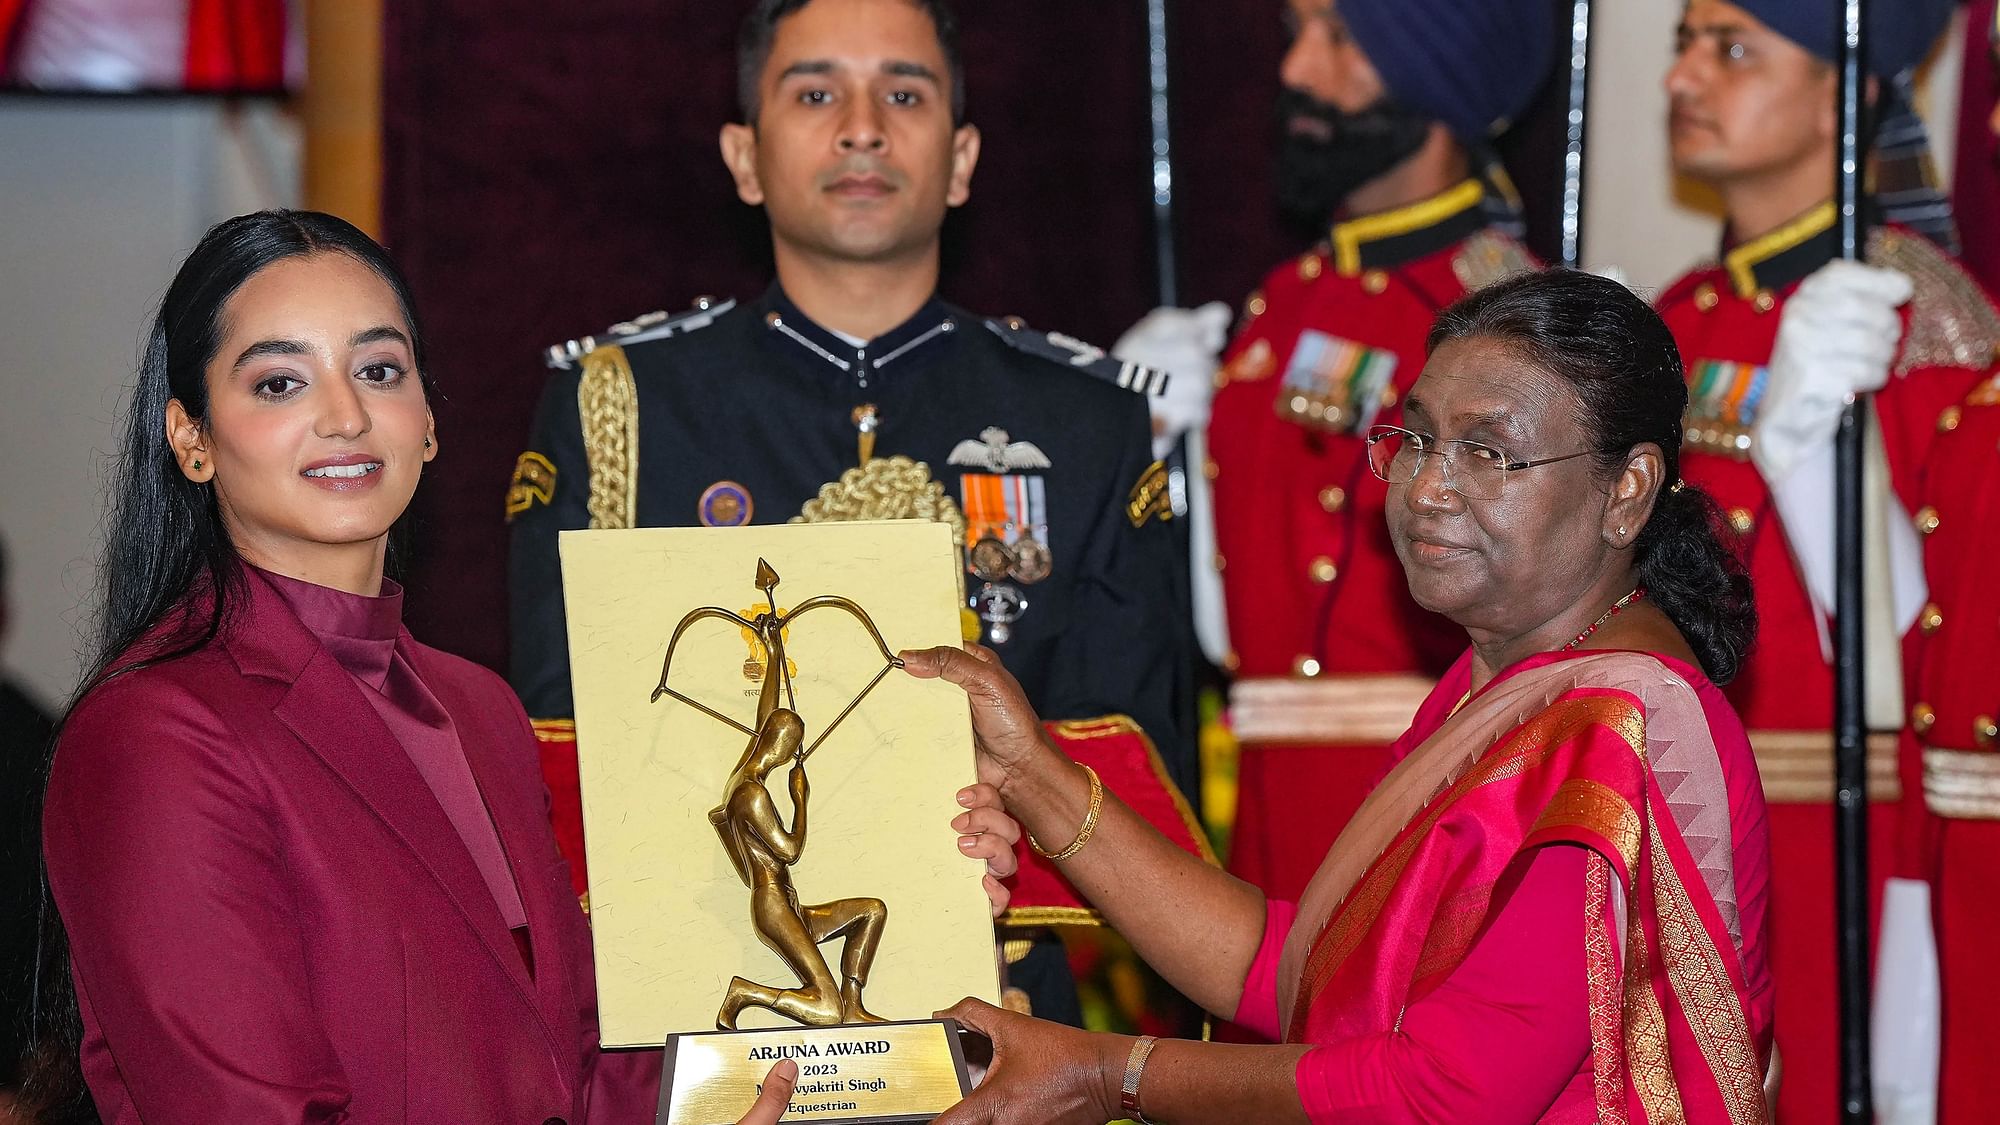 <div class="paragraphs"><p>Divyakriti Singh is the first woman from the country to be honoured with the prestigious Arjuna Award for equestrian sports.</p></div>